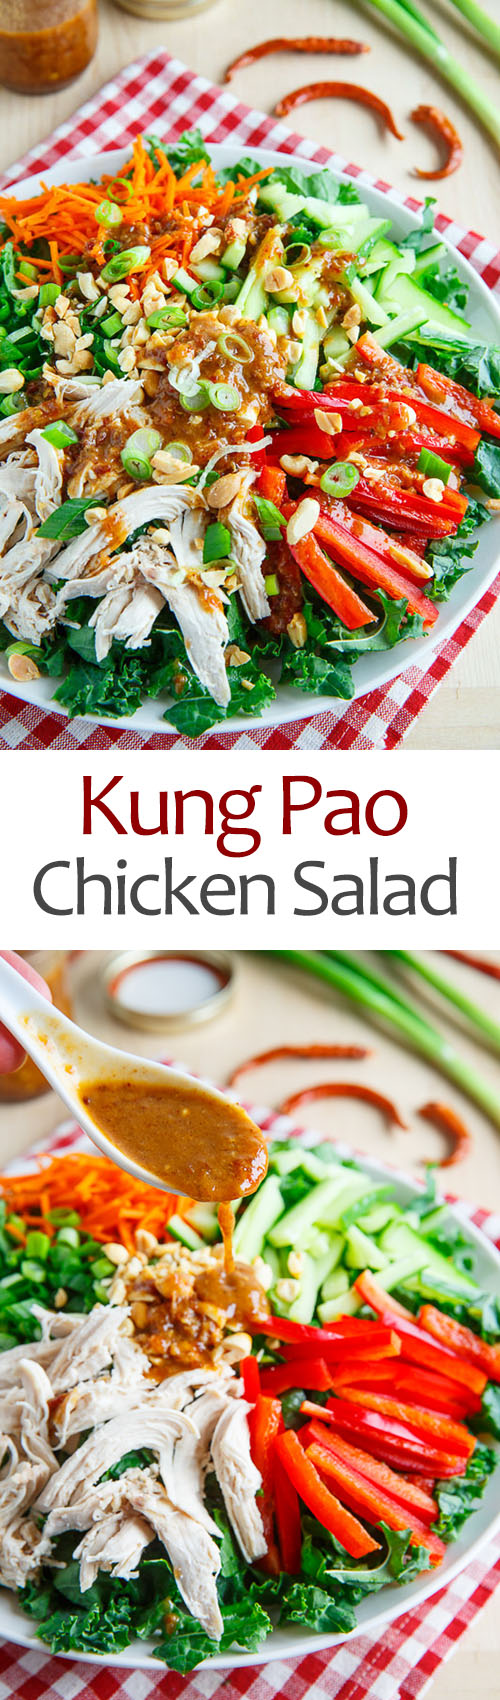 Kung Pao Chicken Salad with Sichuan Dressing